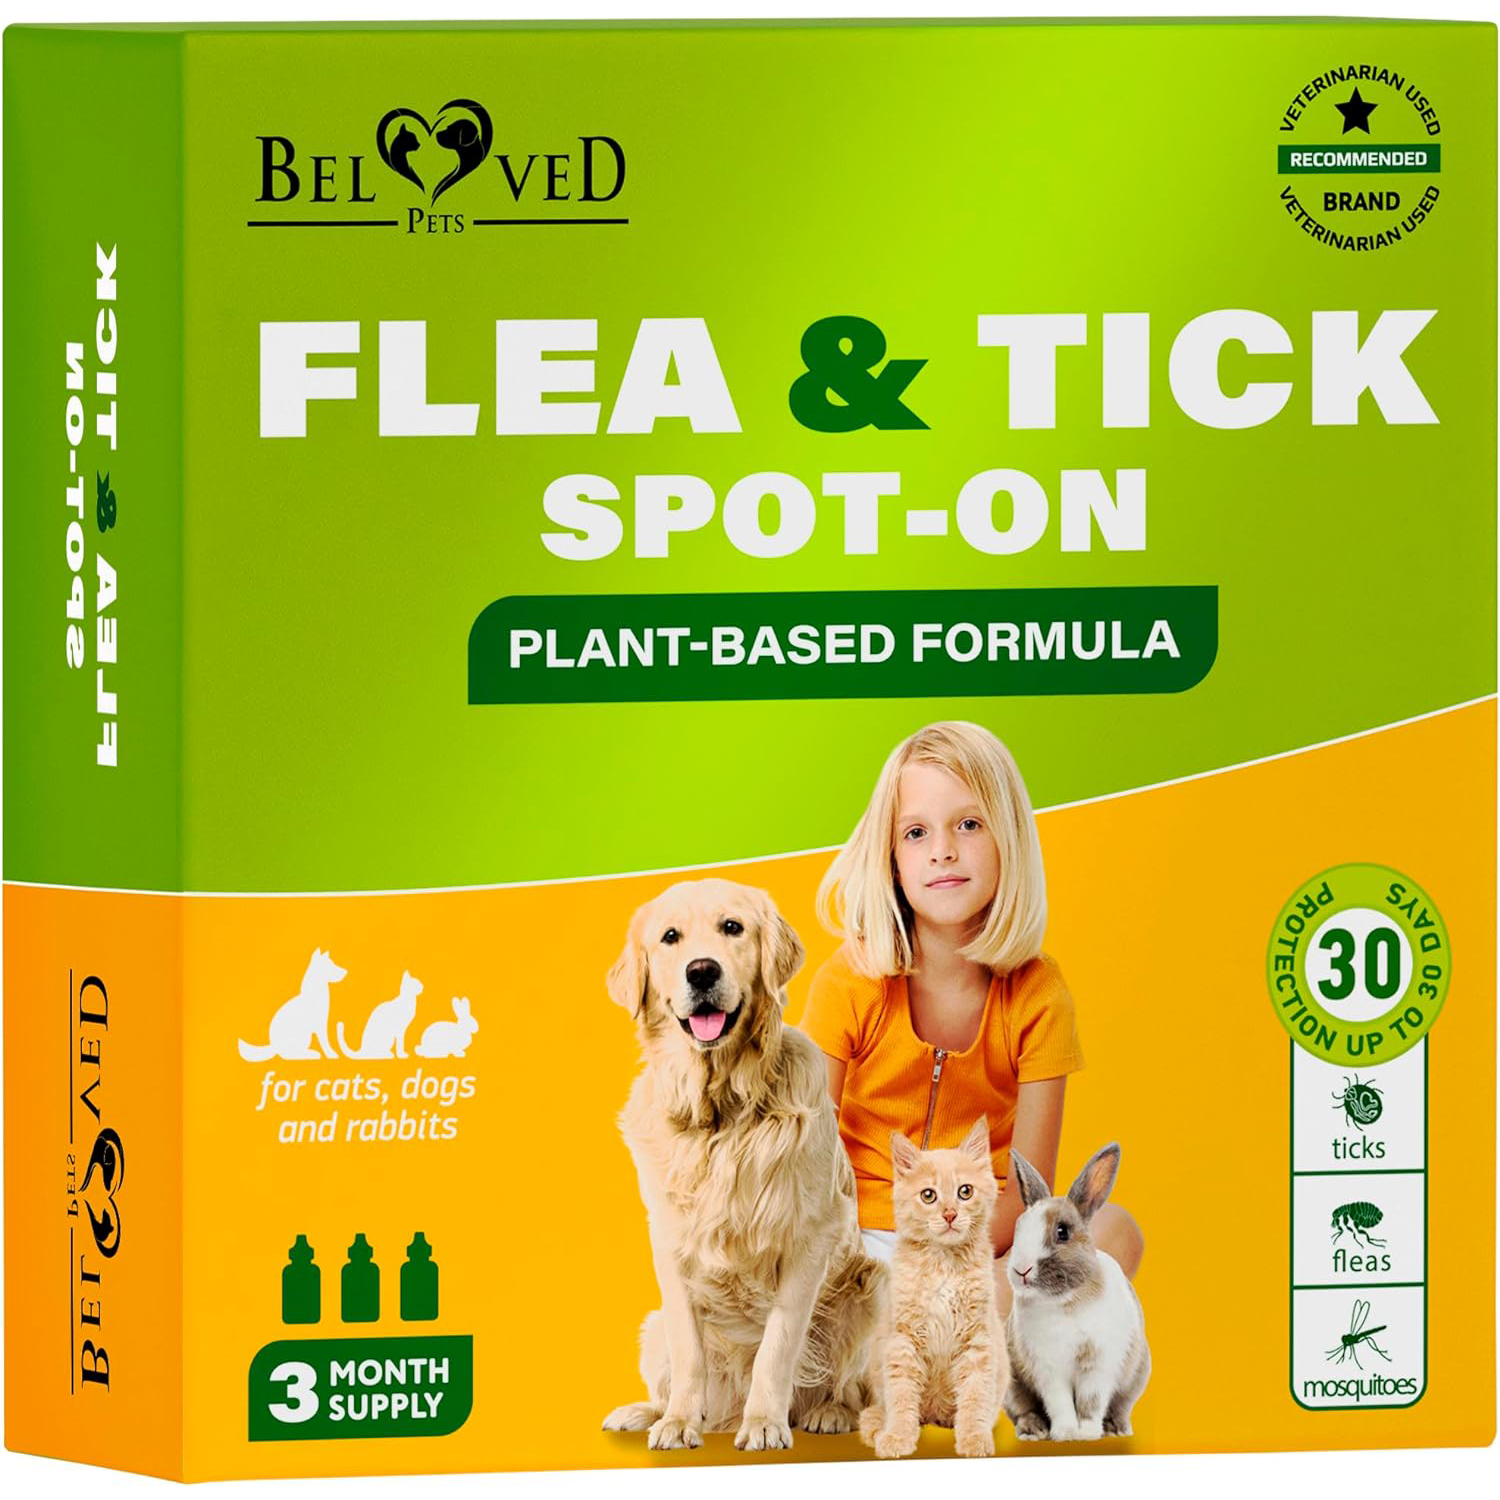 Beloved Pets LY-84 Natural Flea Treatment